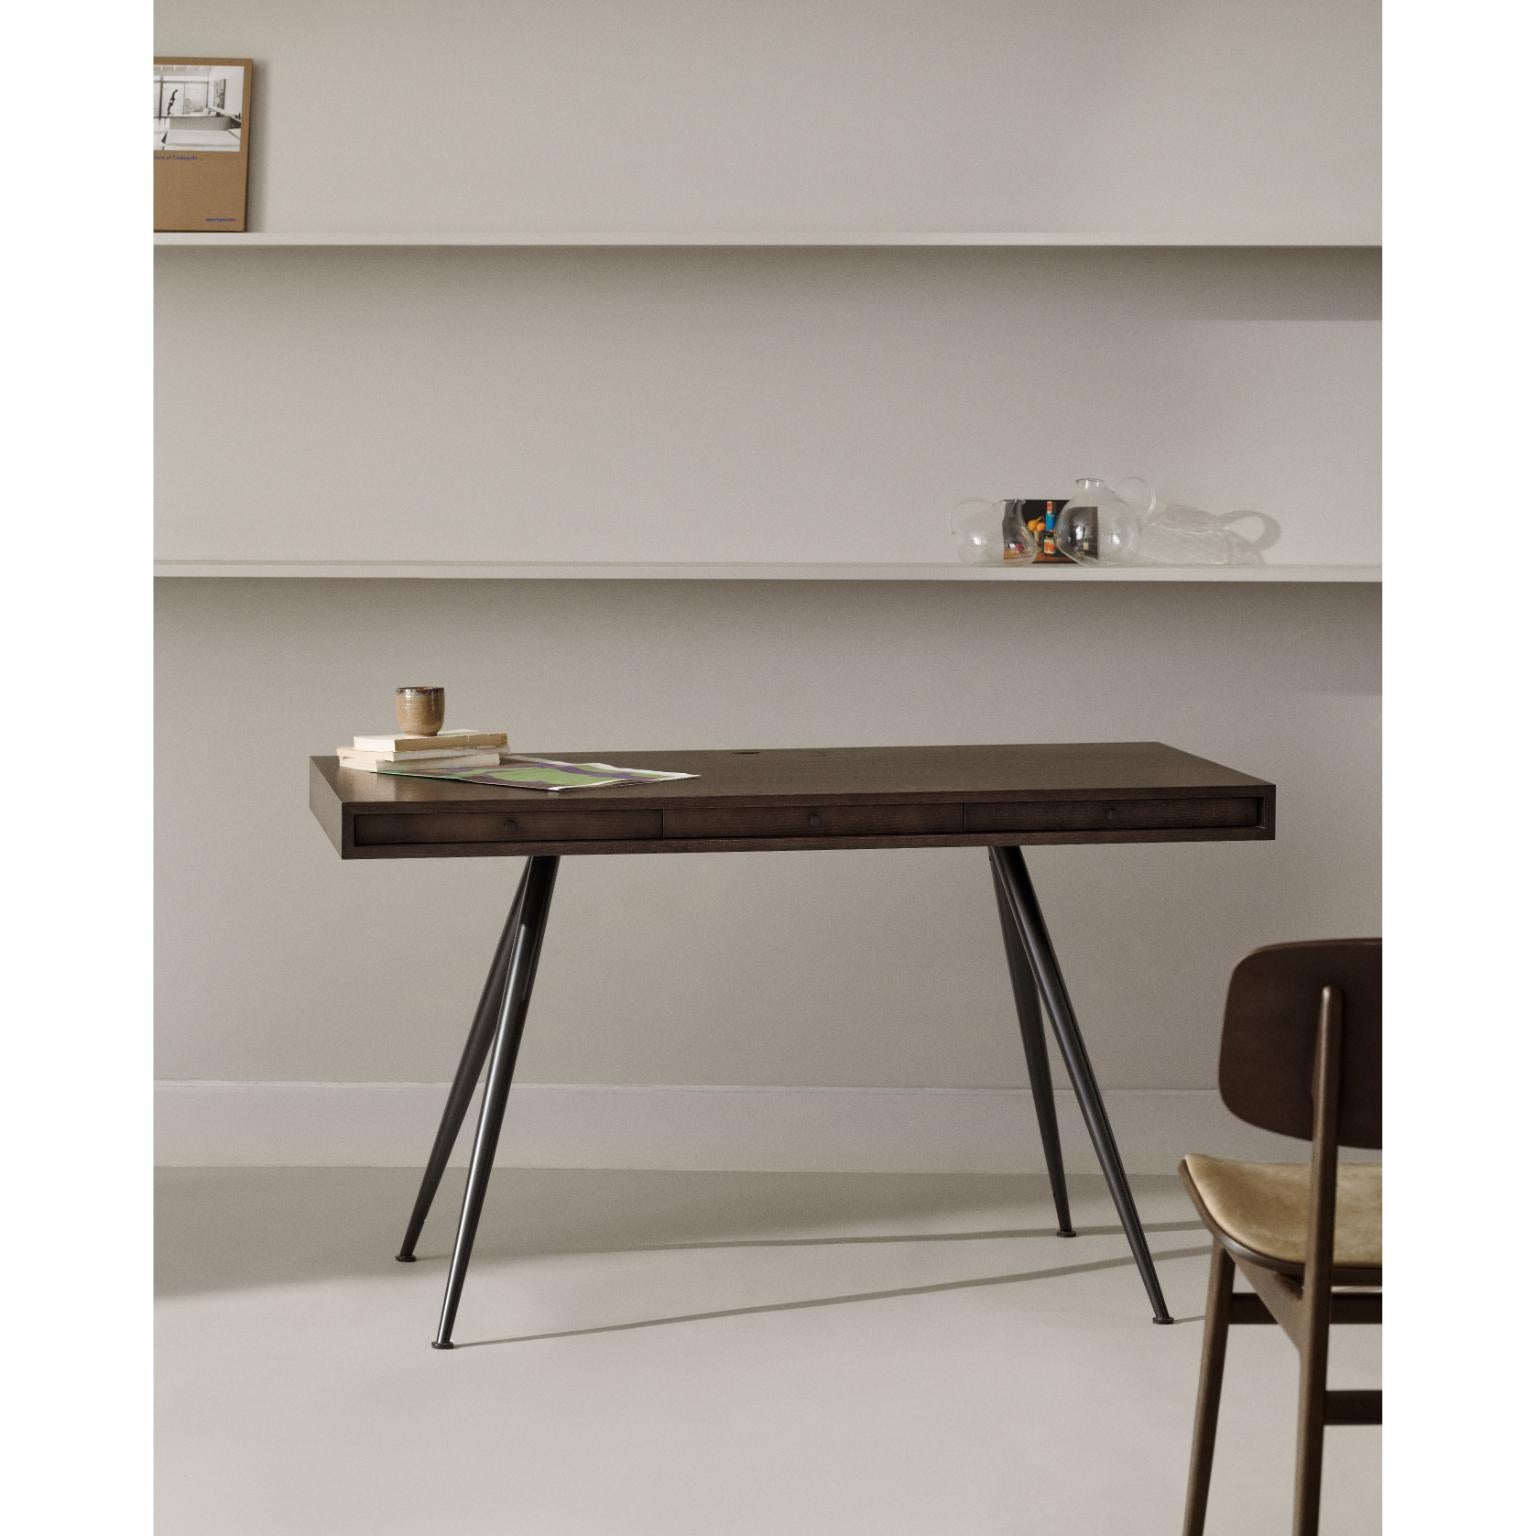 Powder-Coated JFK Home Desk With Standard Legs by NORR11